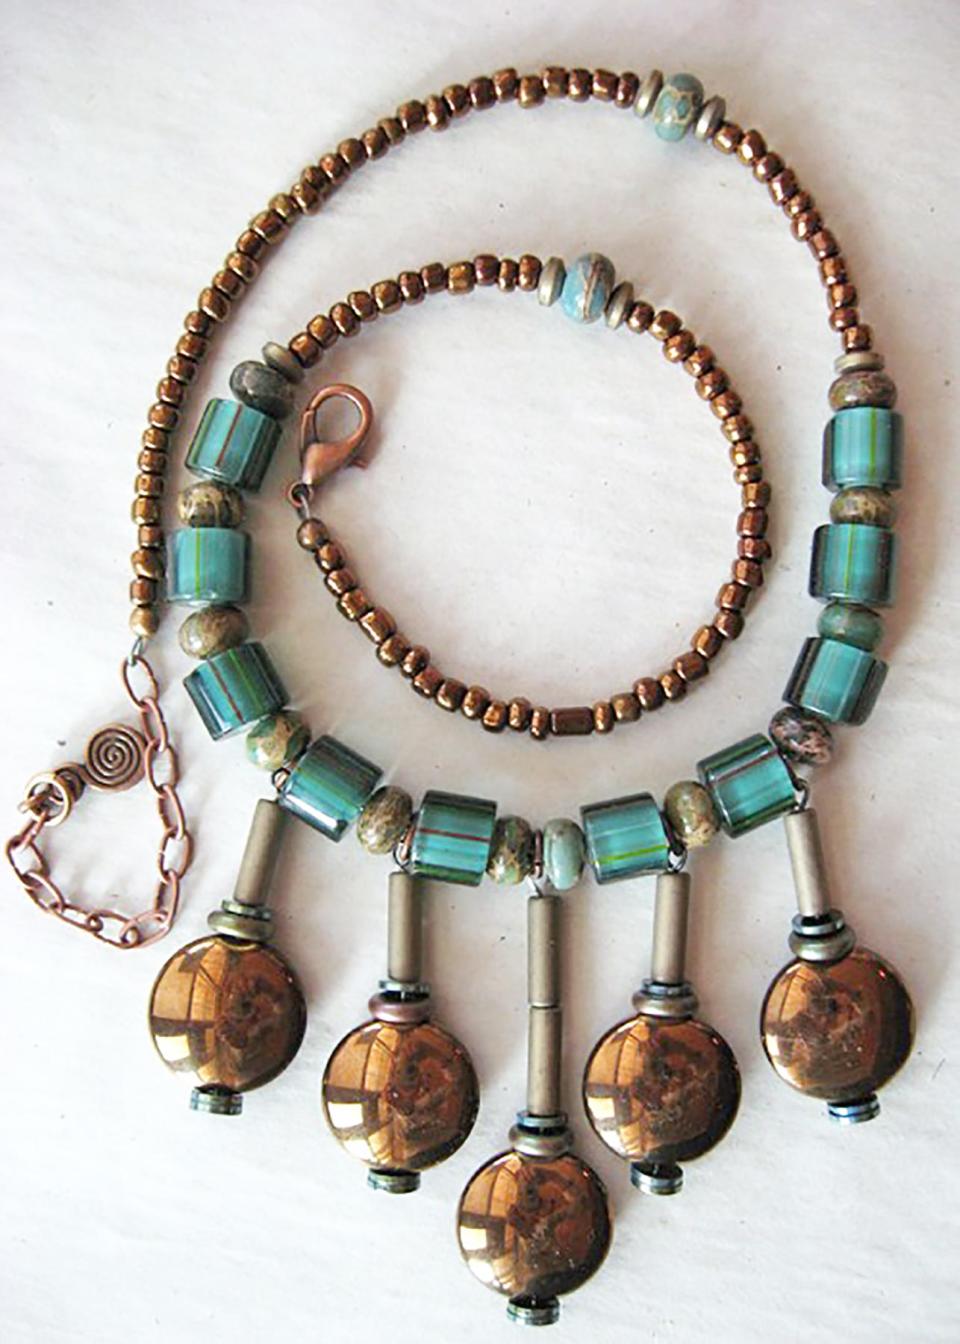 Necklace by Colleen Kuckleman